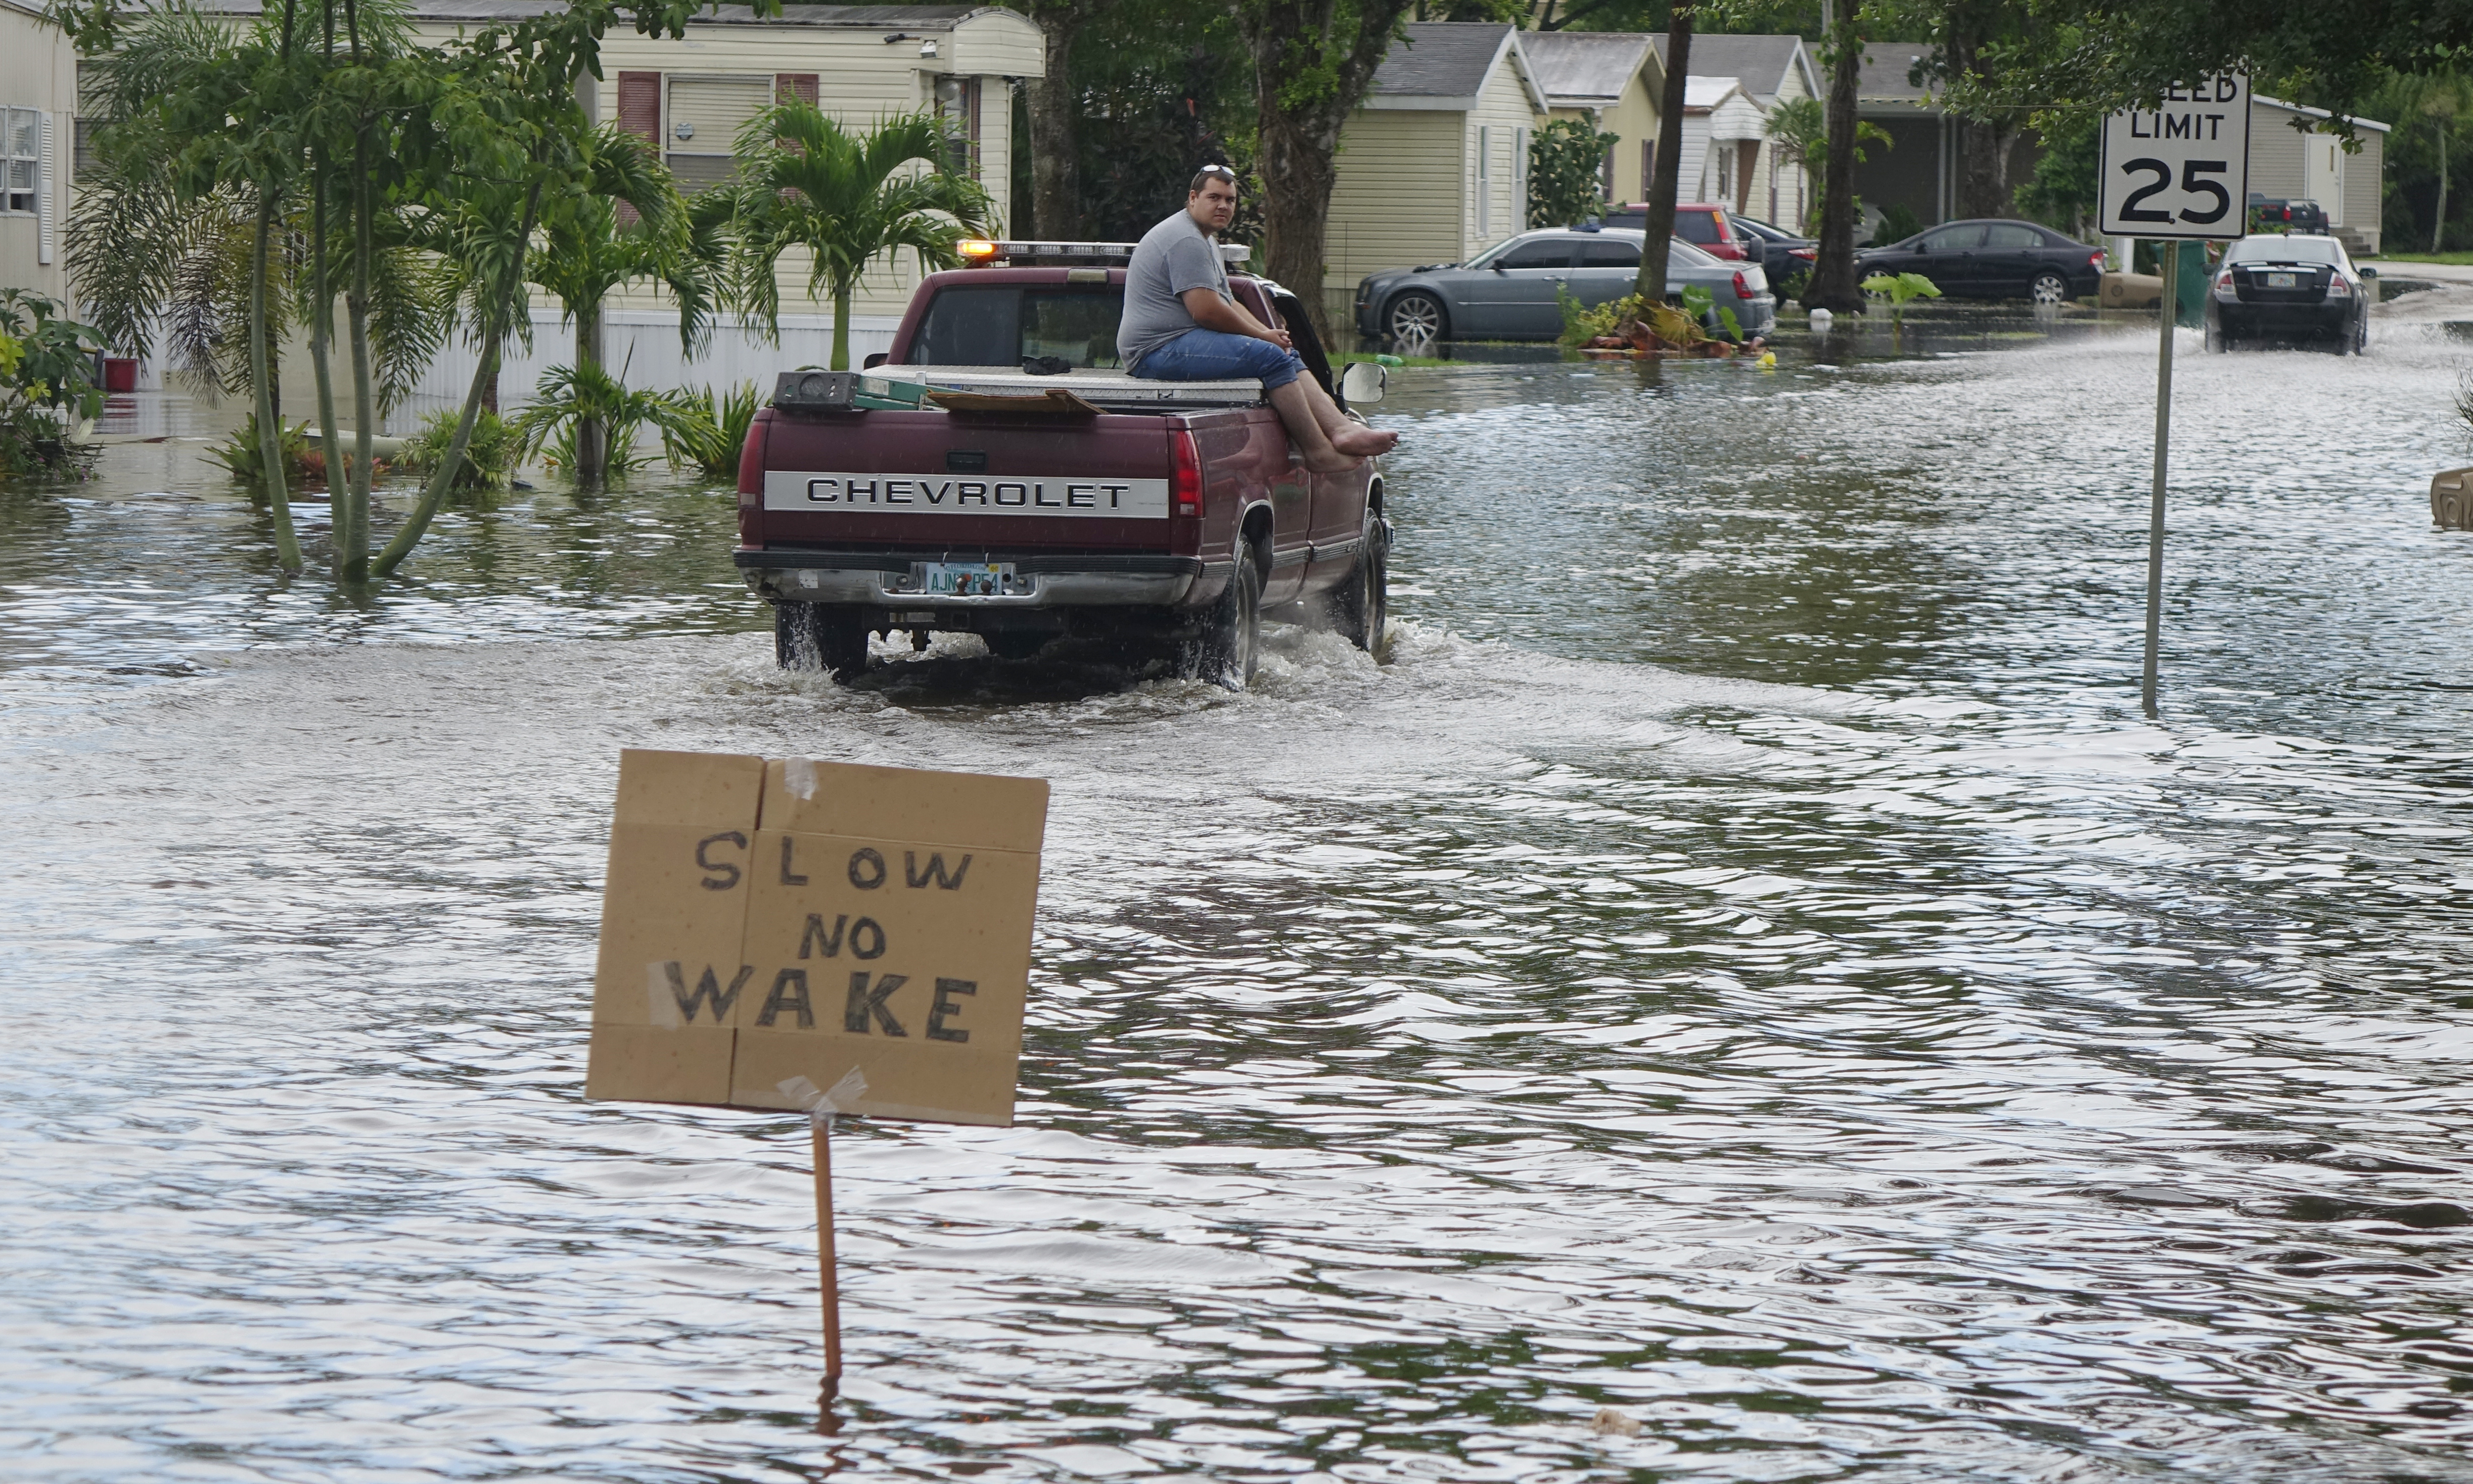 A sign on the swale on SW 135 terrace asks motorist to go slow in Sunshine Village in Davie, Fla.,Wednesday, June 7, 2017. Several days of constant rain has caused flooding throughout Broward and Palm Beach Counties.  (Joe Cavaretta/South Florida Sun-Sentinel via AP)